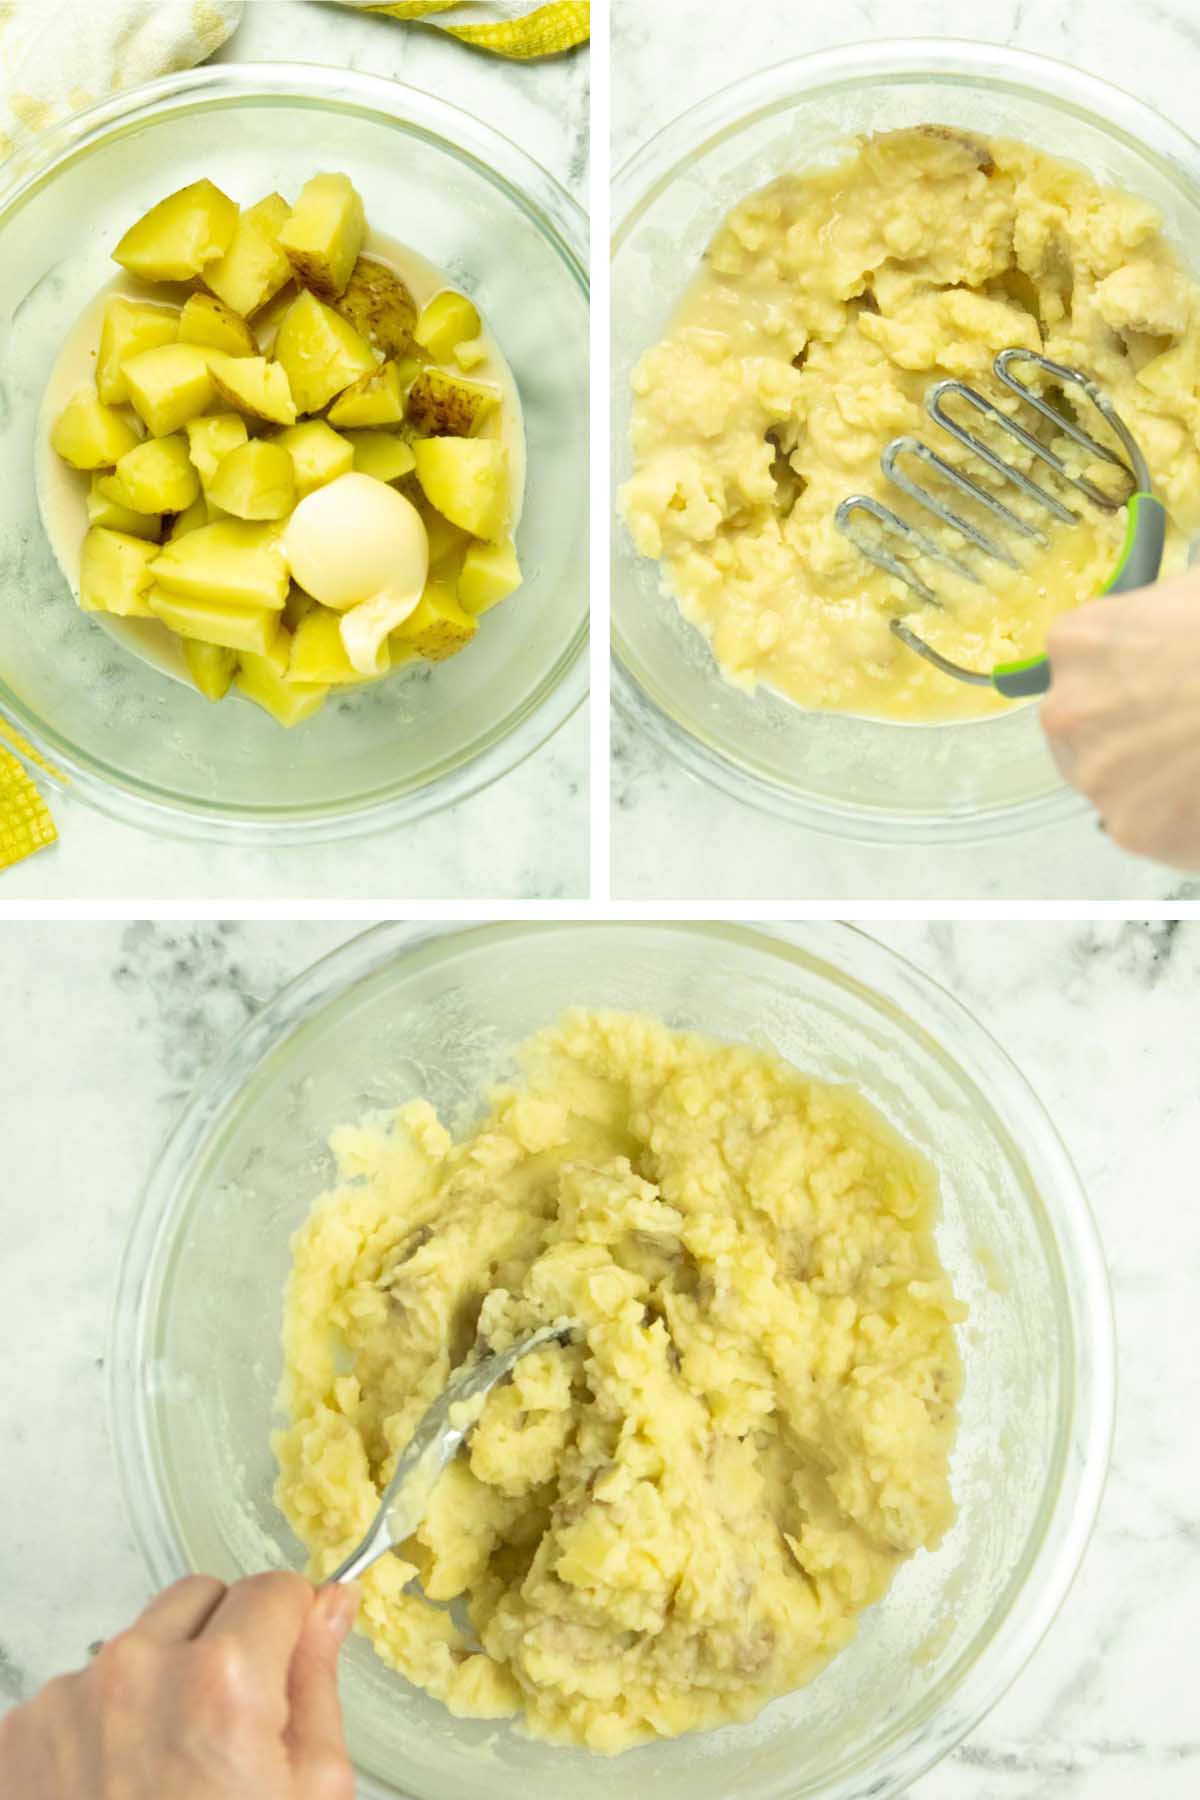 image collage showing mashed potato ingredients and mashing and whipping the potatoes